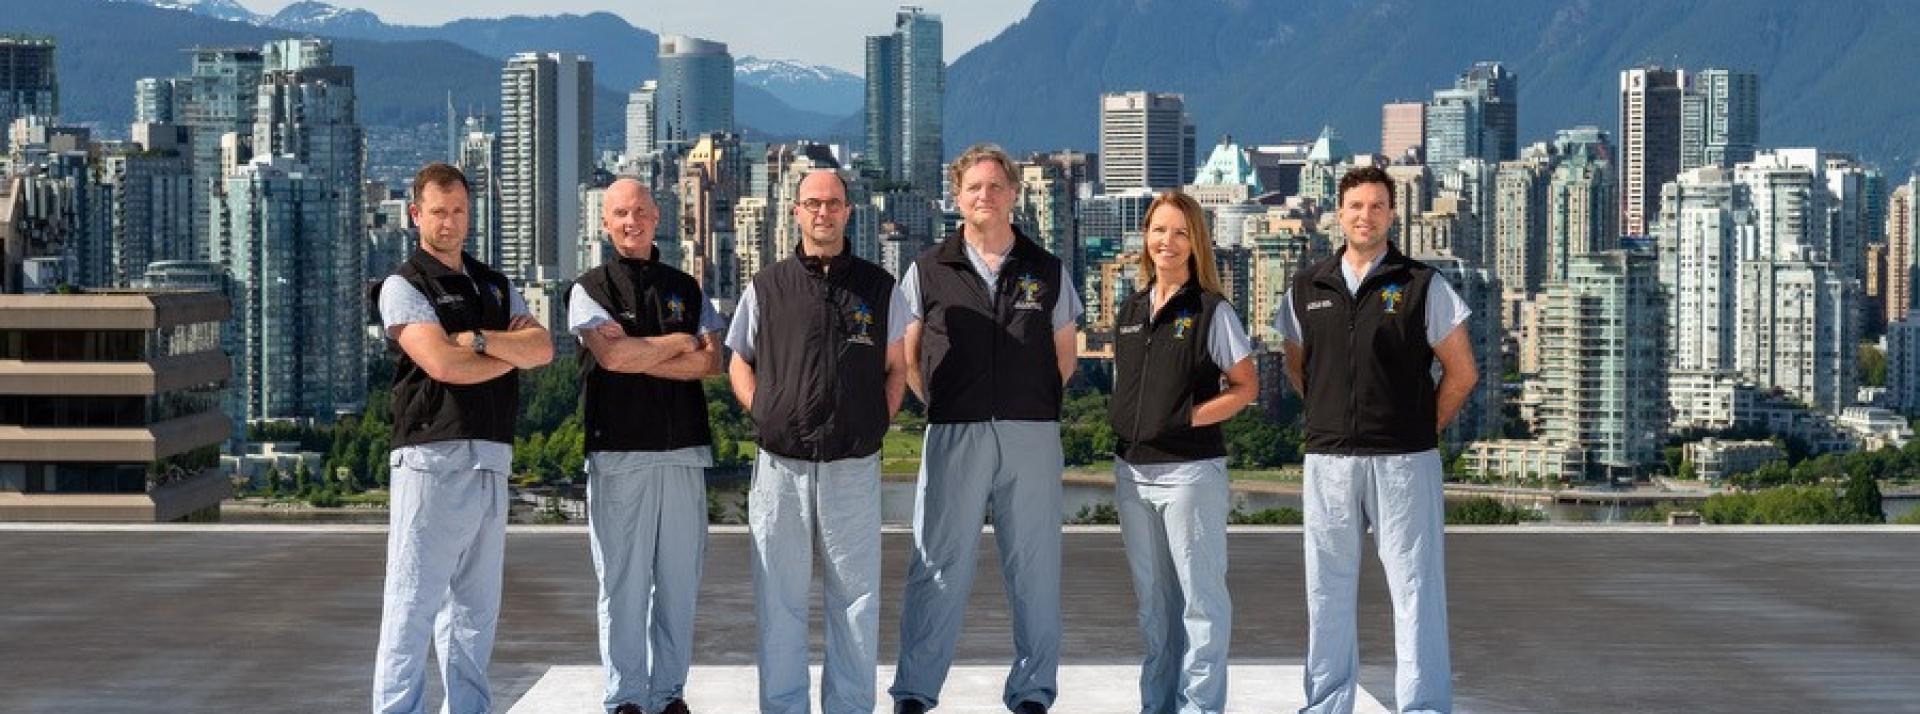 Six members of a trauma team stand on a helipad with mountains in the background.